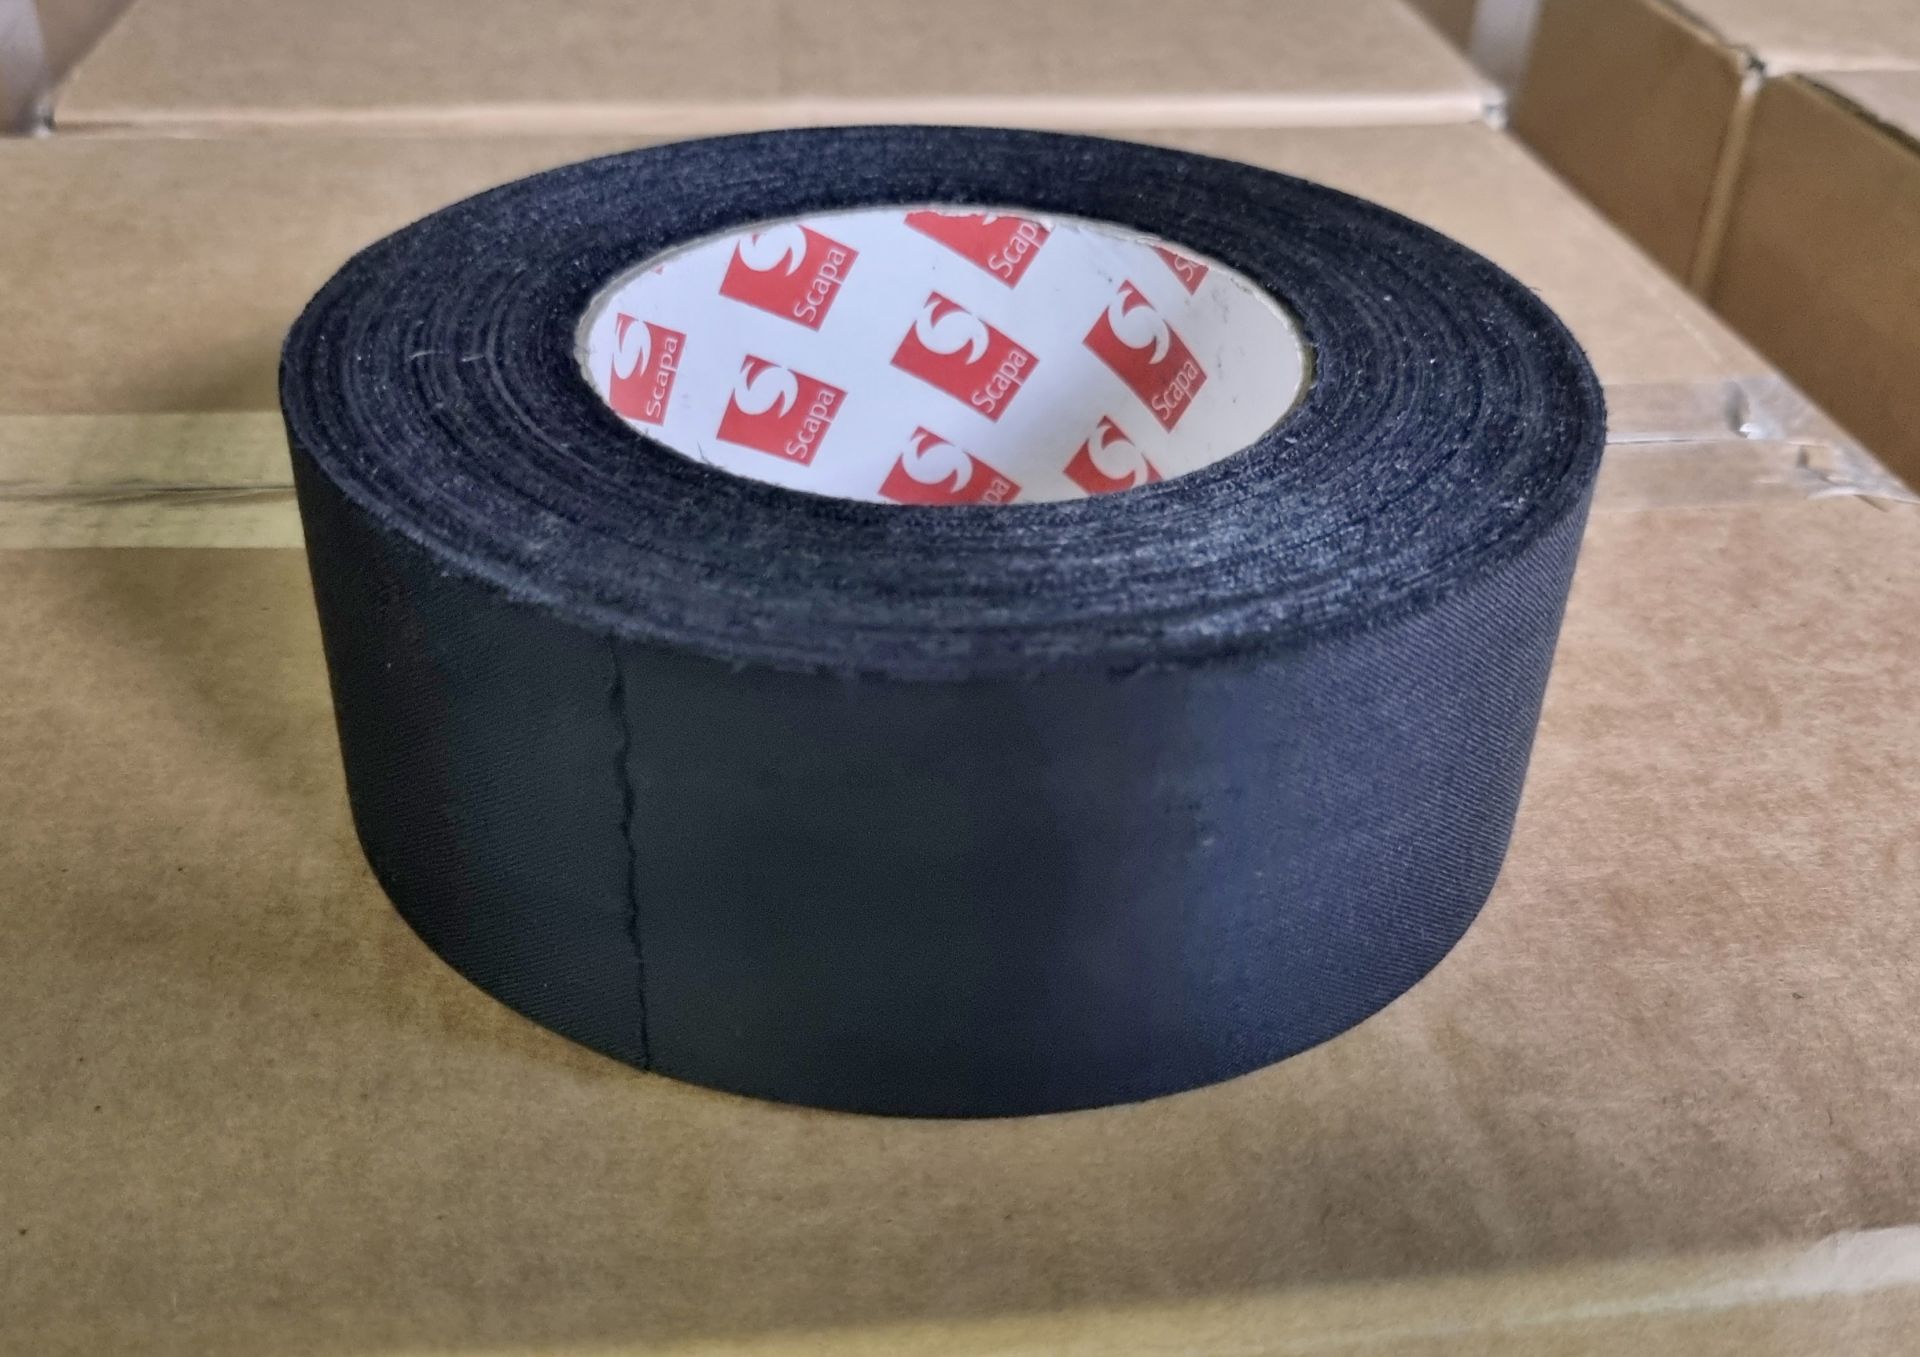 15x boxes of Scapa 3370 Rayon cloth fabric black adhesive tape, 50mm width, 50m length, box of 16 - Image 5 of 5